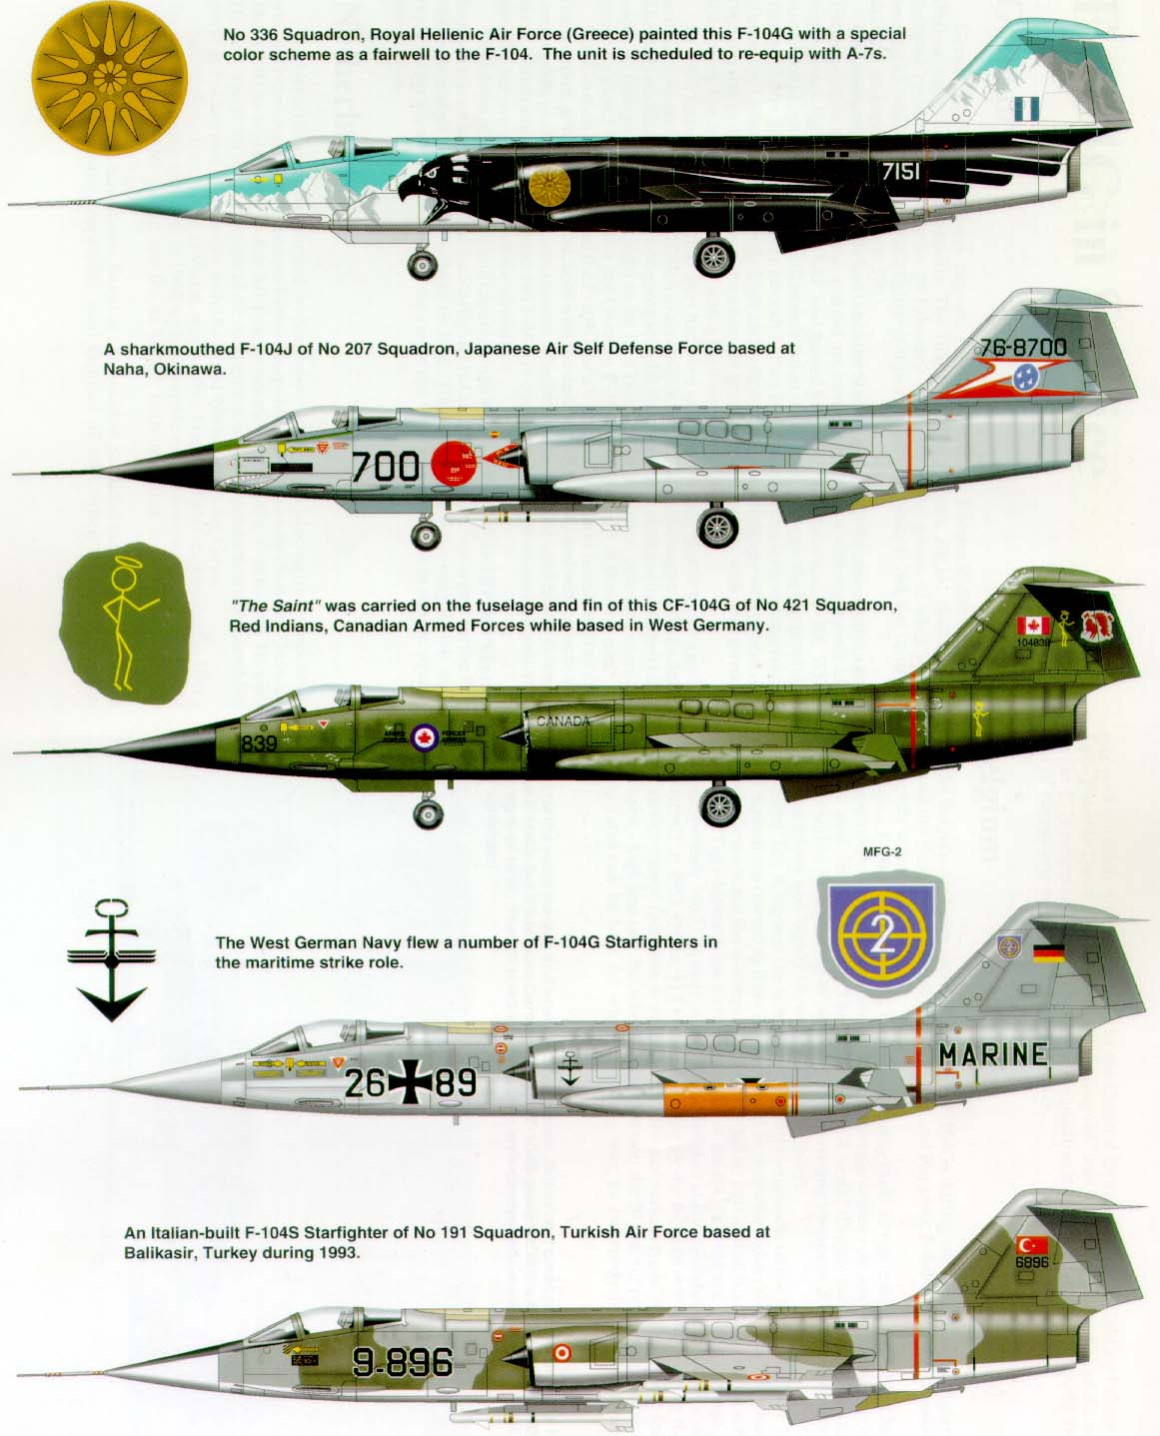 1706479852 919 Variants of the ‘Man in the Missile Starfighter